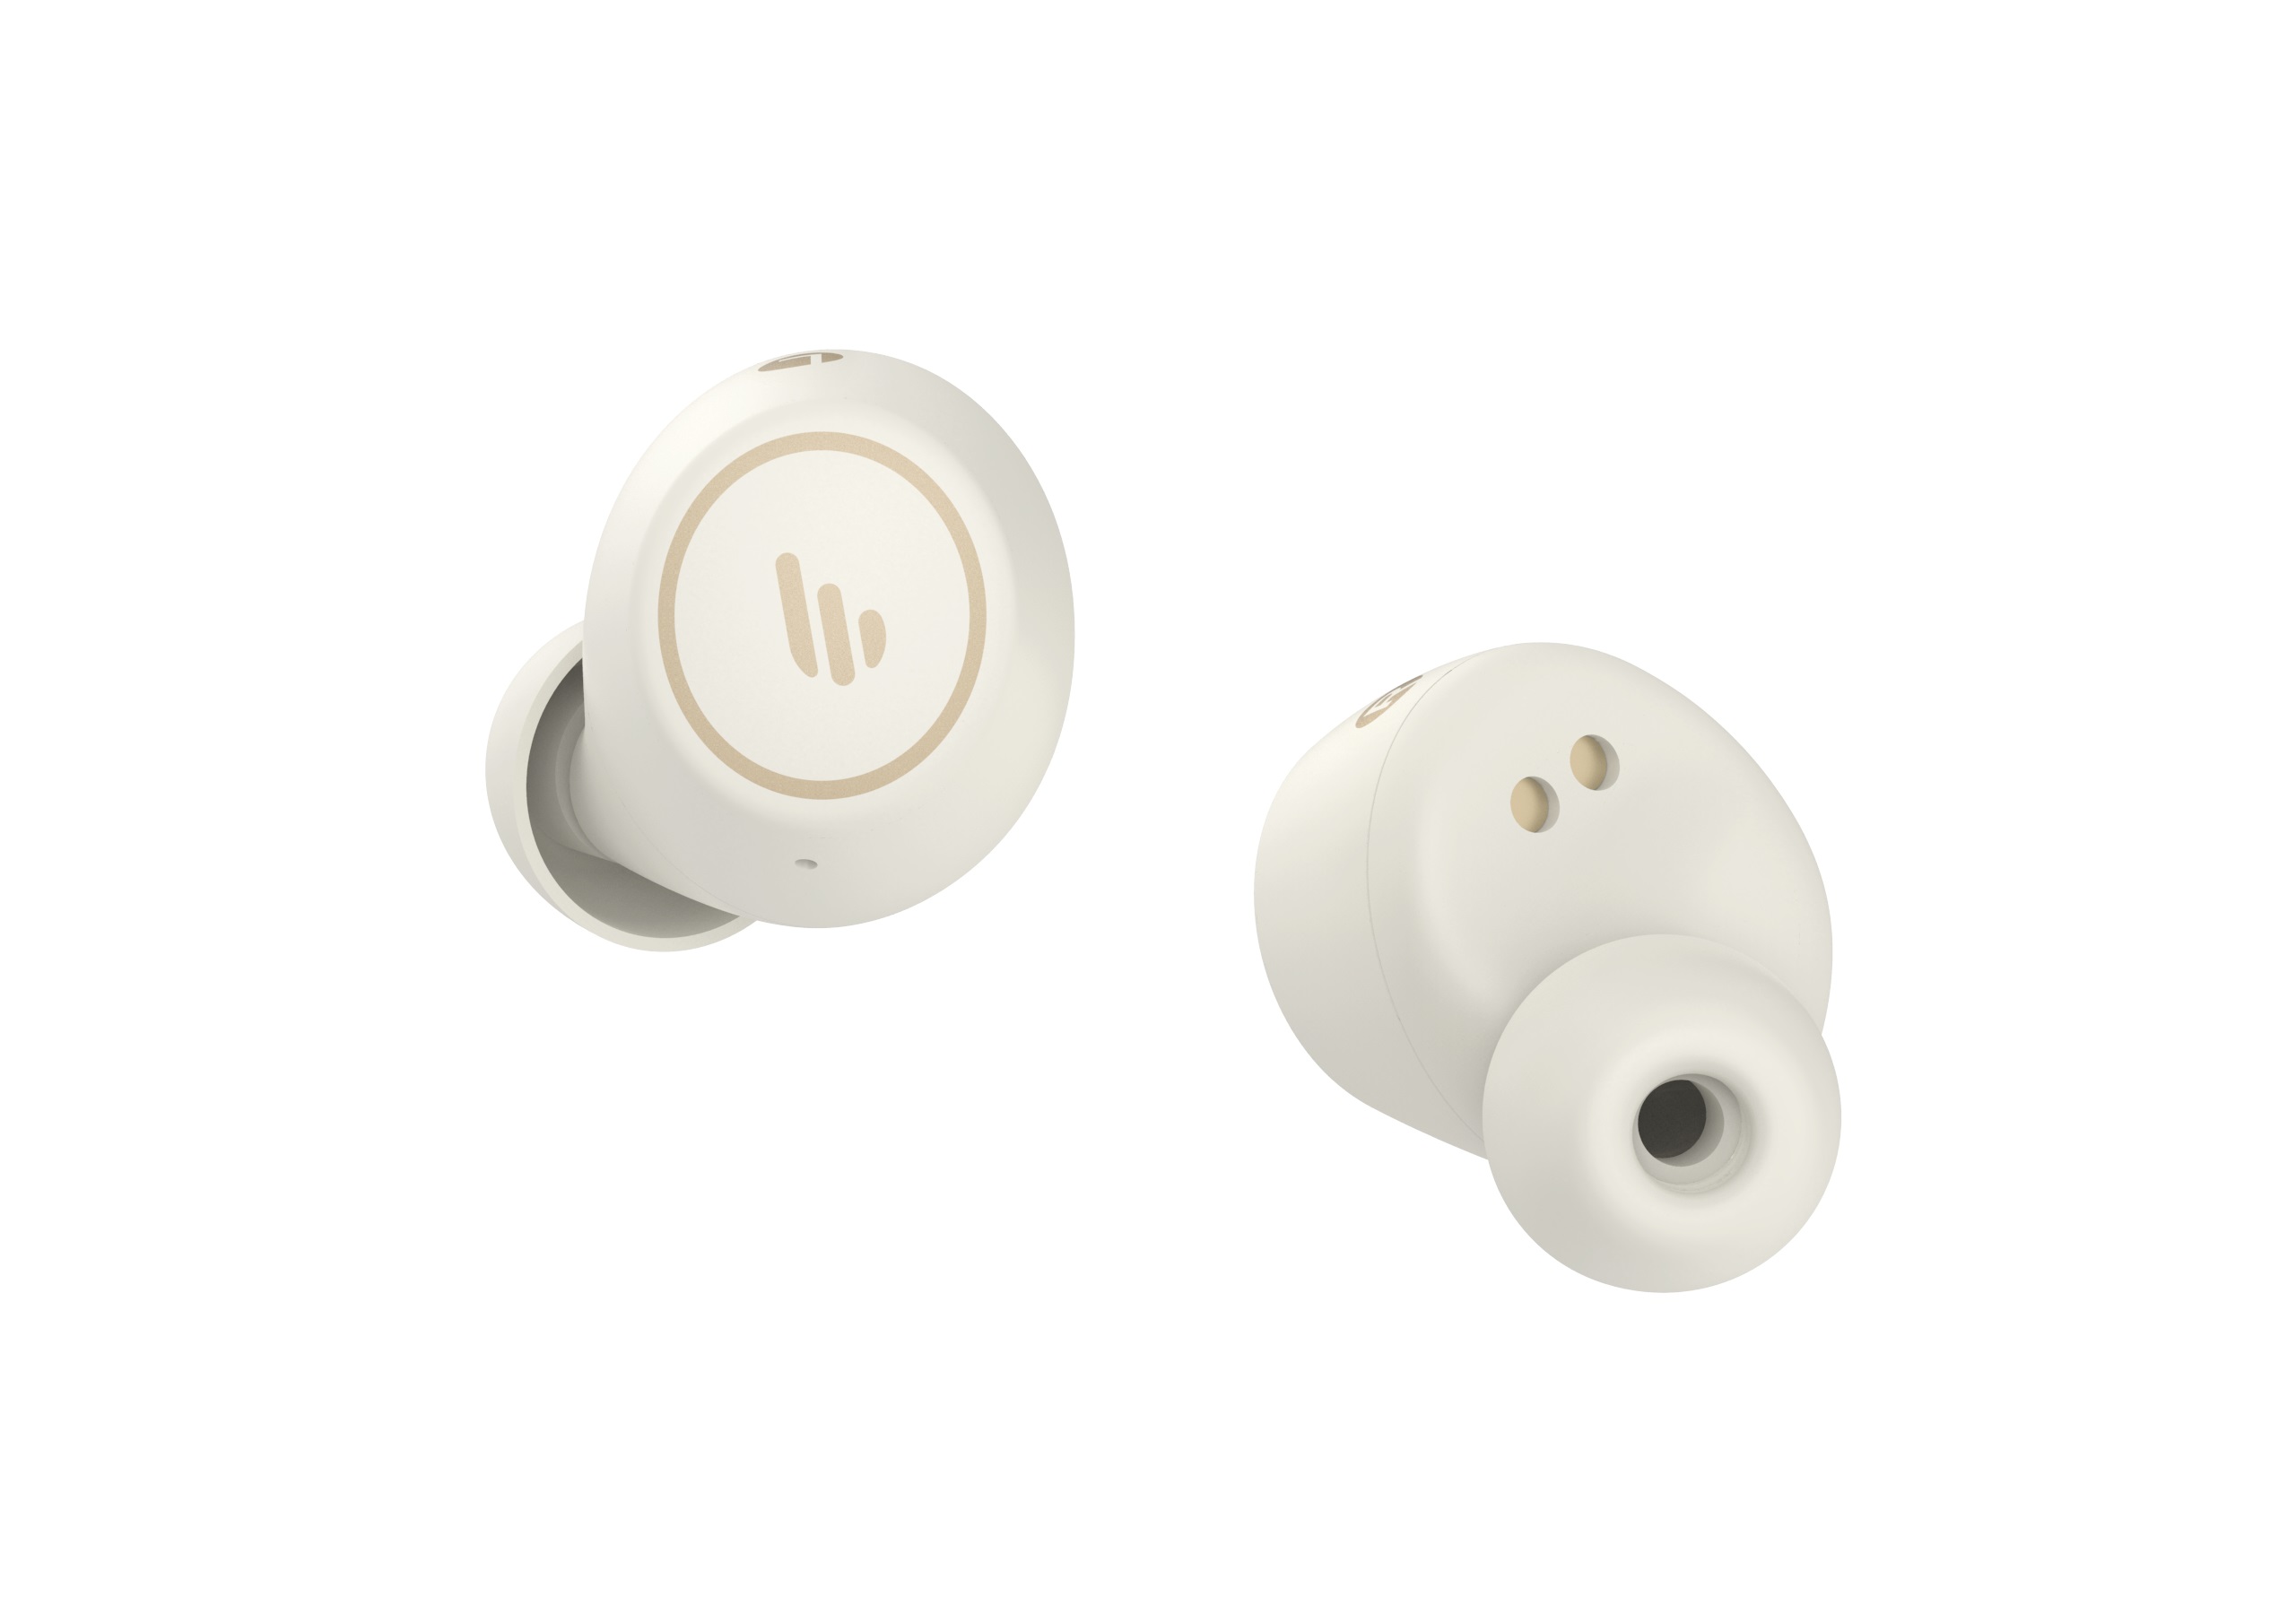 Edifier TWS1 PRO IVORY Bluetooth Wireless Earbuds cVc8.0 Noise Cancellation Long Battery Life, Quick Charge USB-C, IP65 Dust Proof and Water Resistant